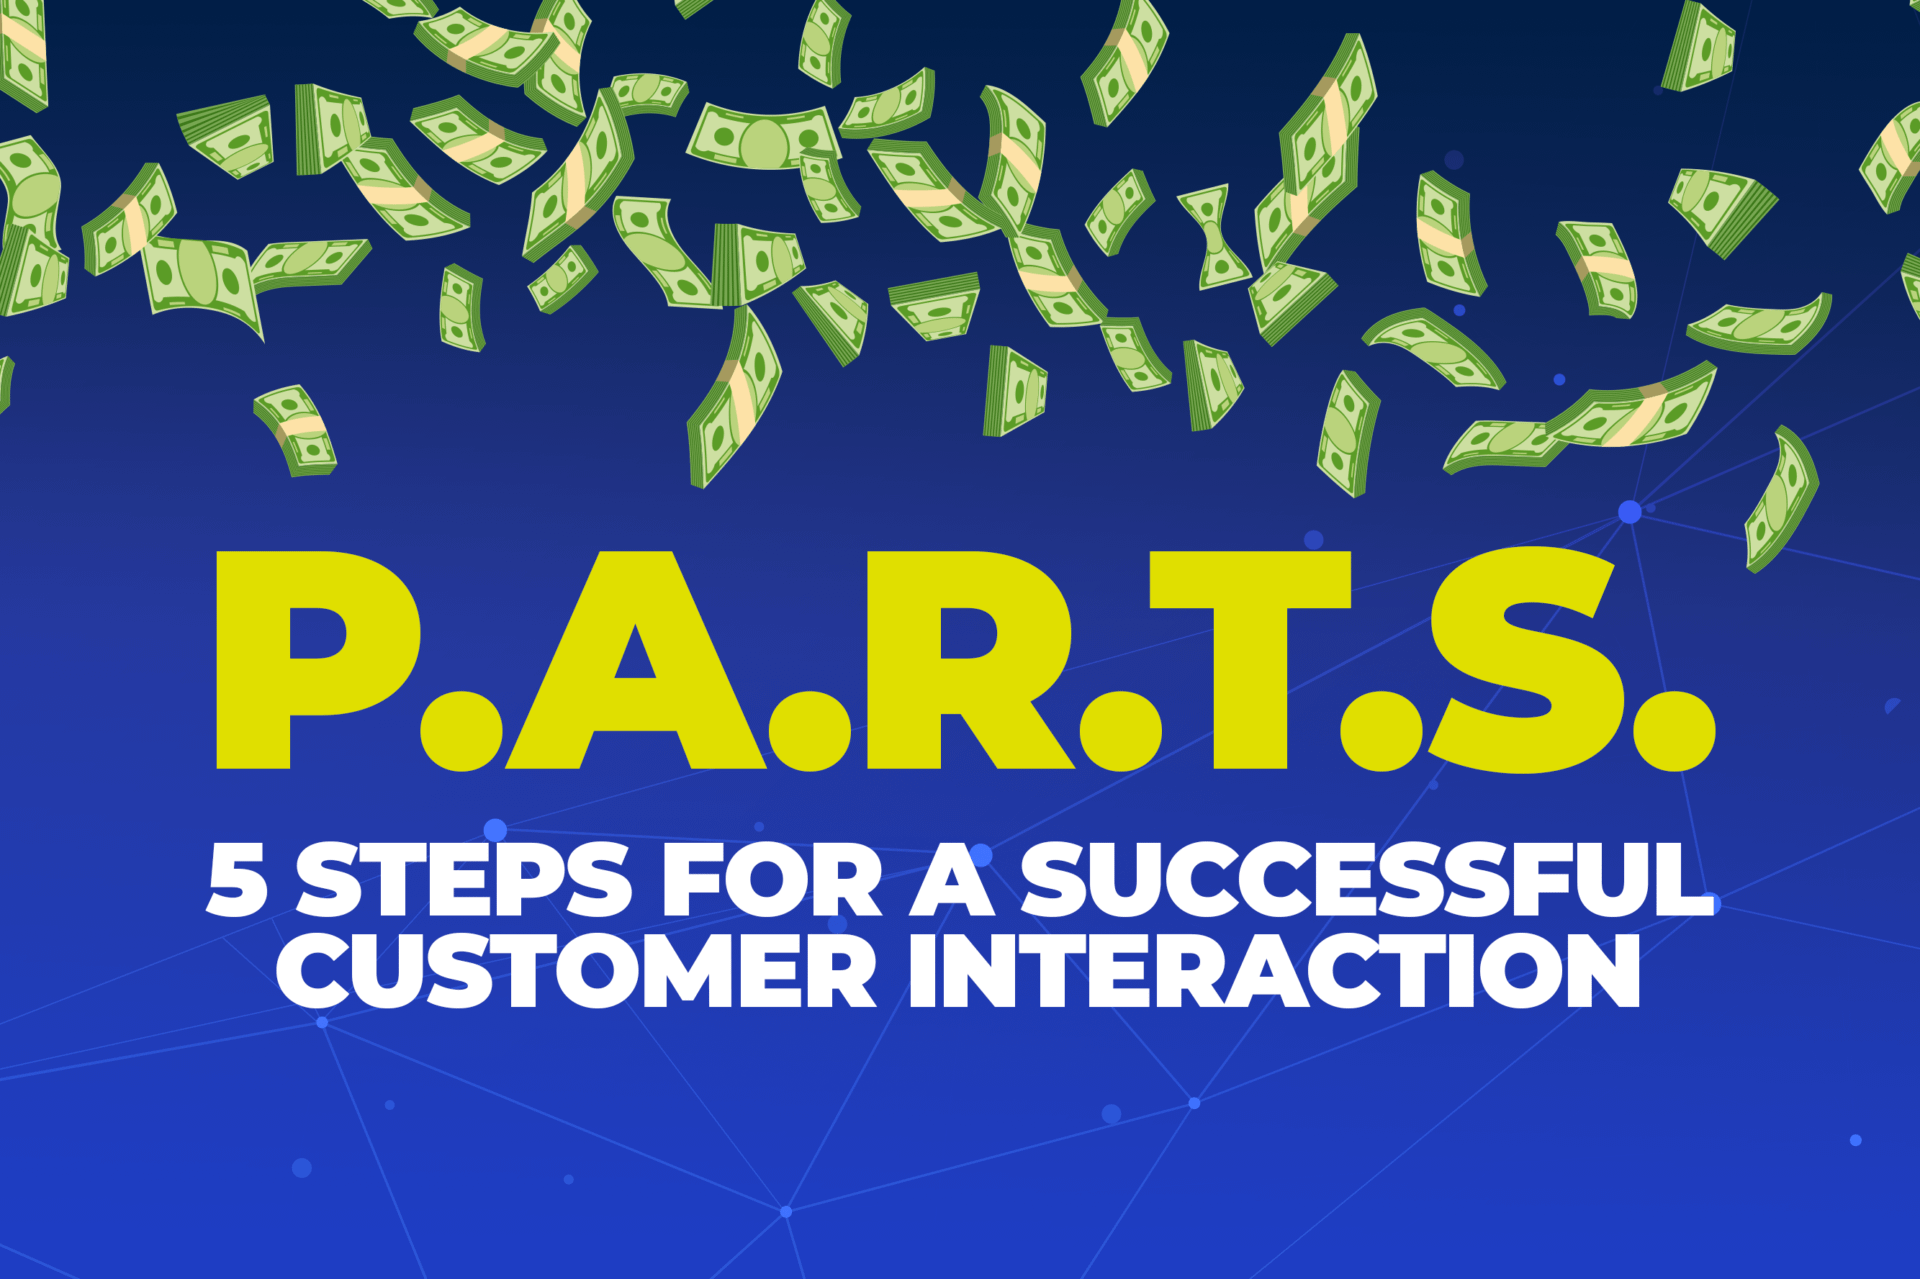 P.A.R.T.S. 5 Steps for a successful customer interaction